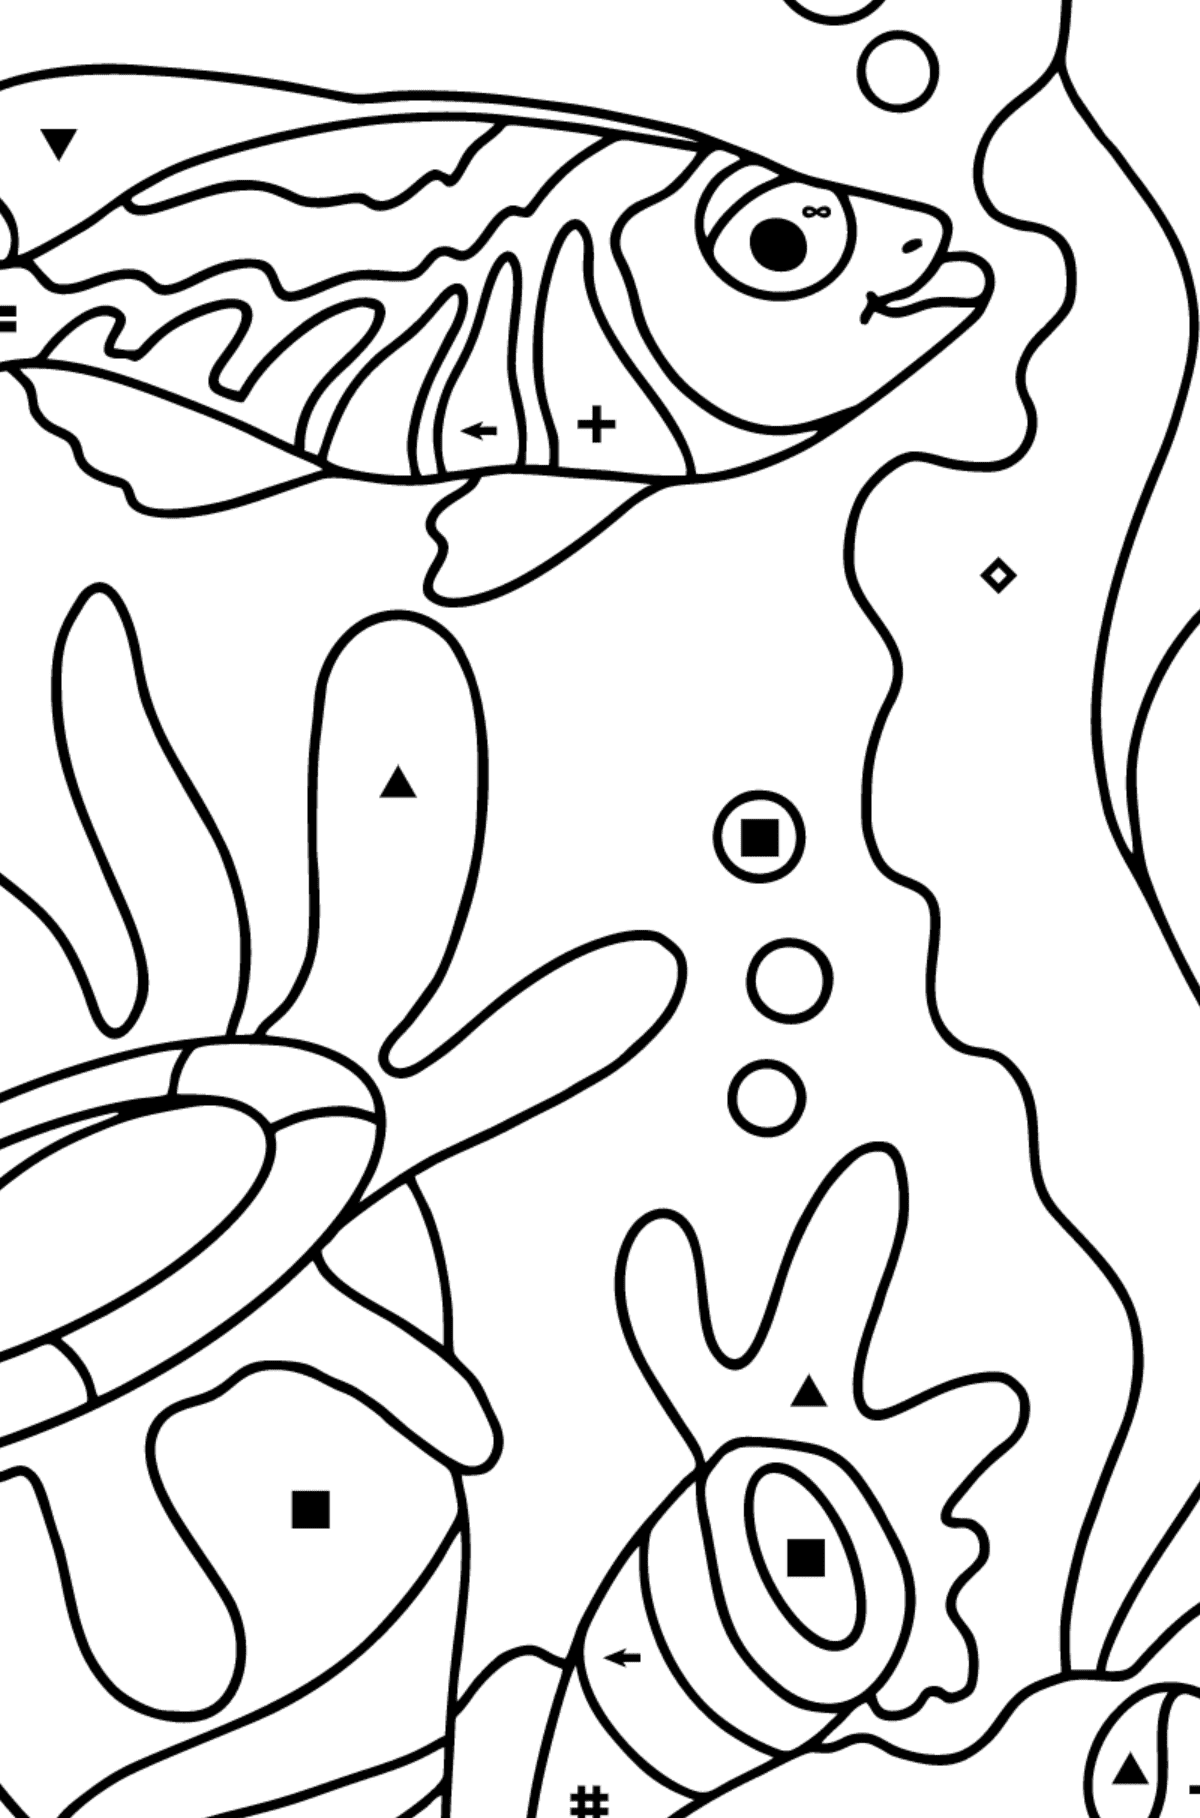 Coloring Page - A Fish is Admiring the Corals - Coloring by Symbols for Children